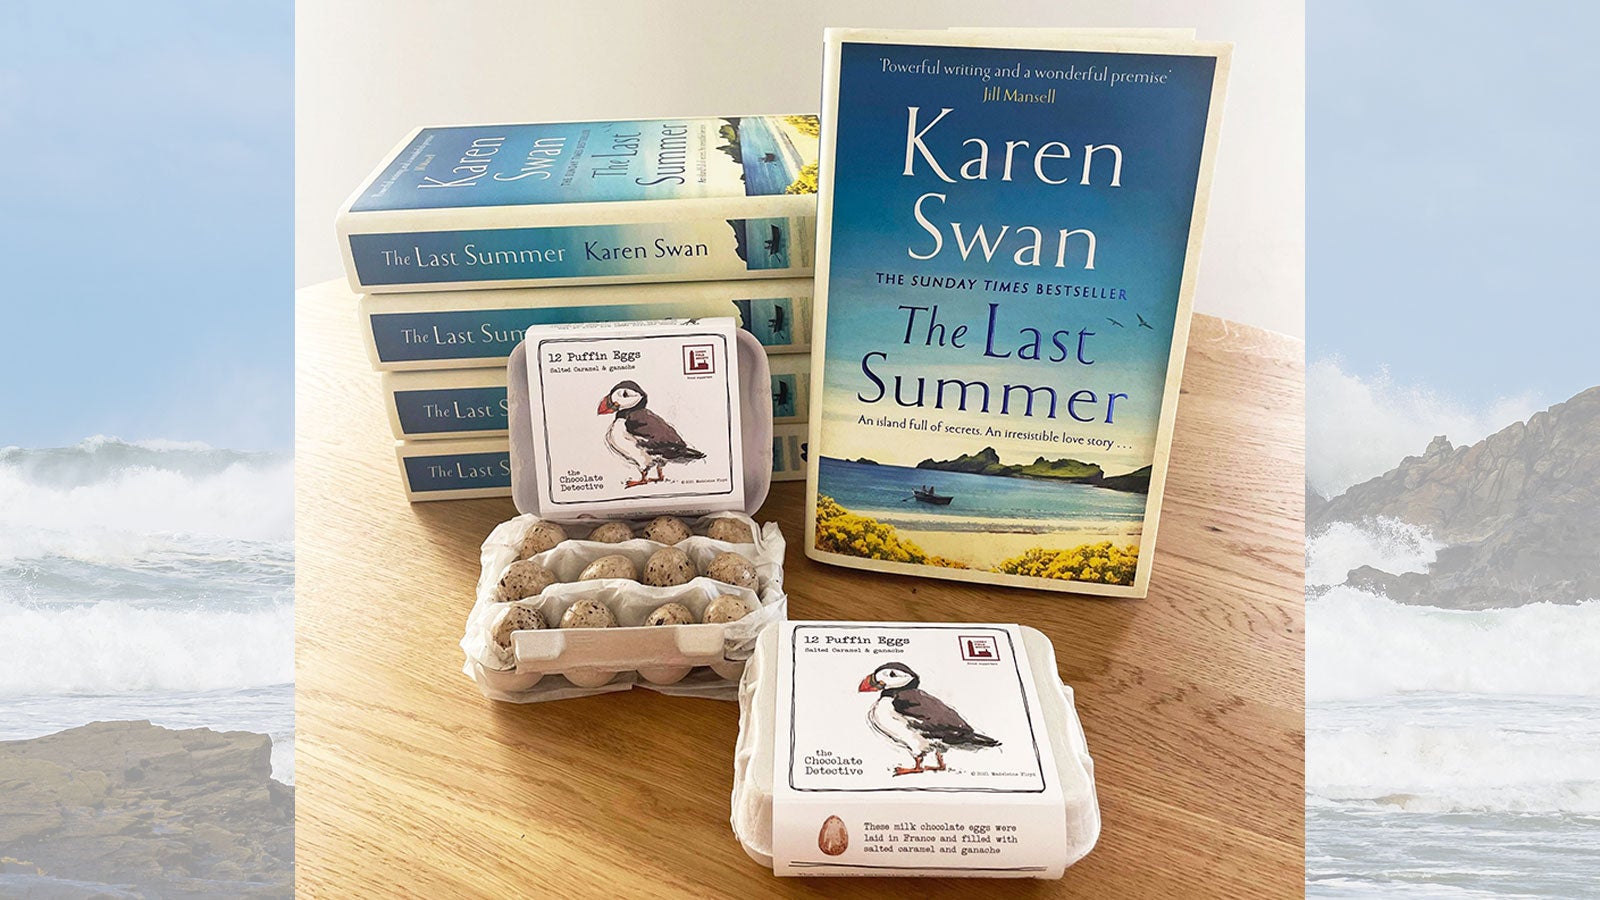 A photograph of five copies of Karen Swan's The Last Summer with some chocolate puffin eggs from The Chocolate Detective.